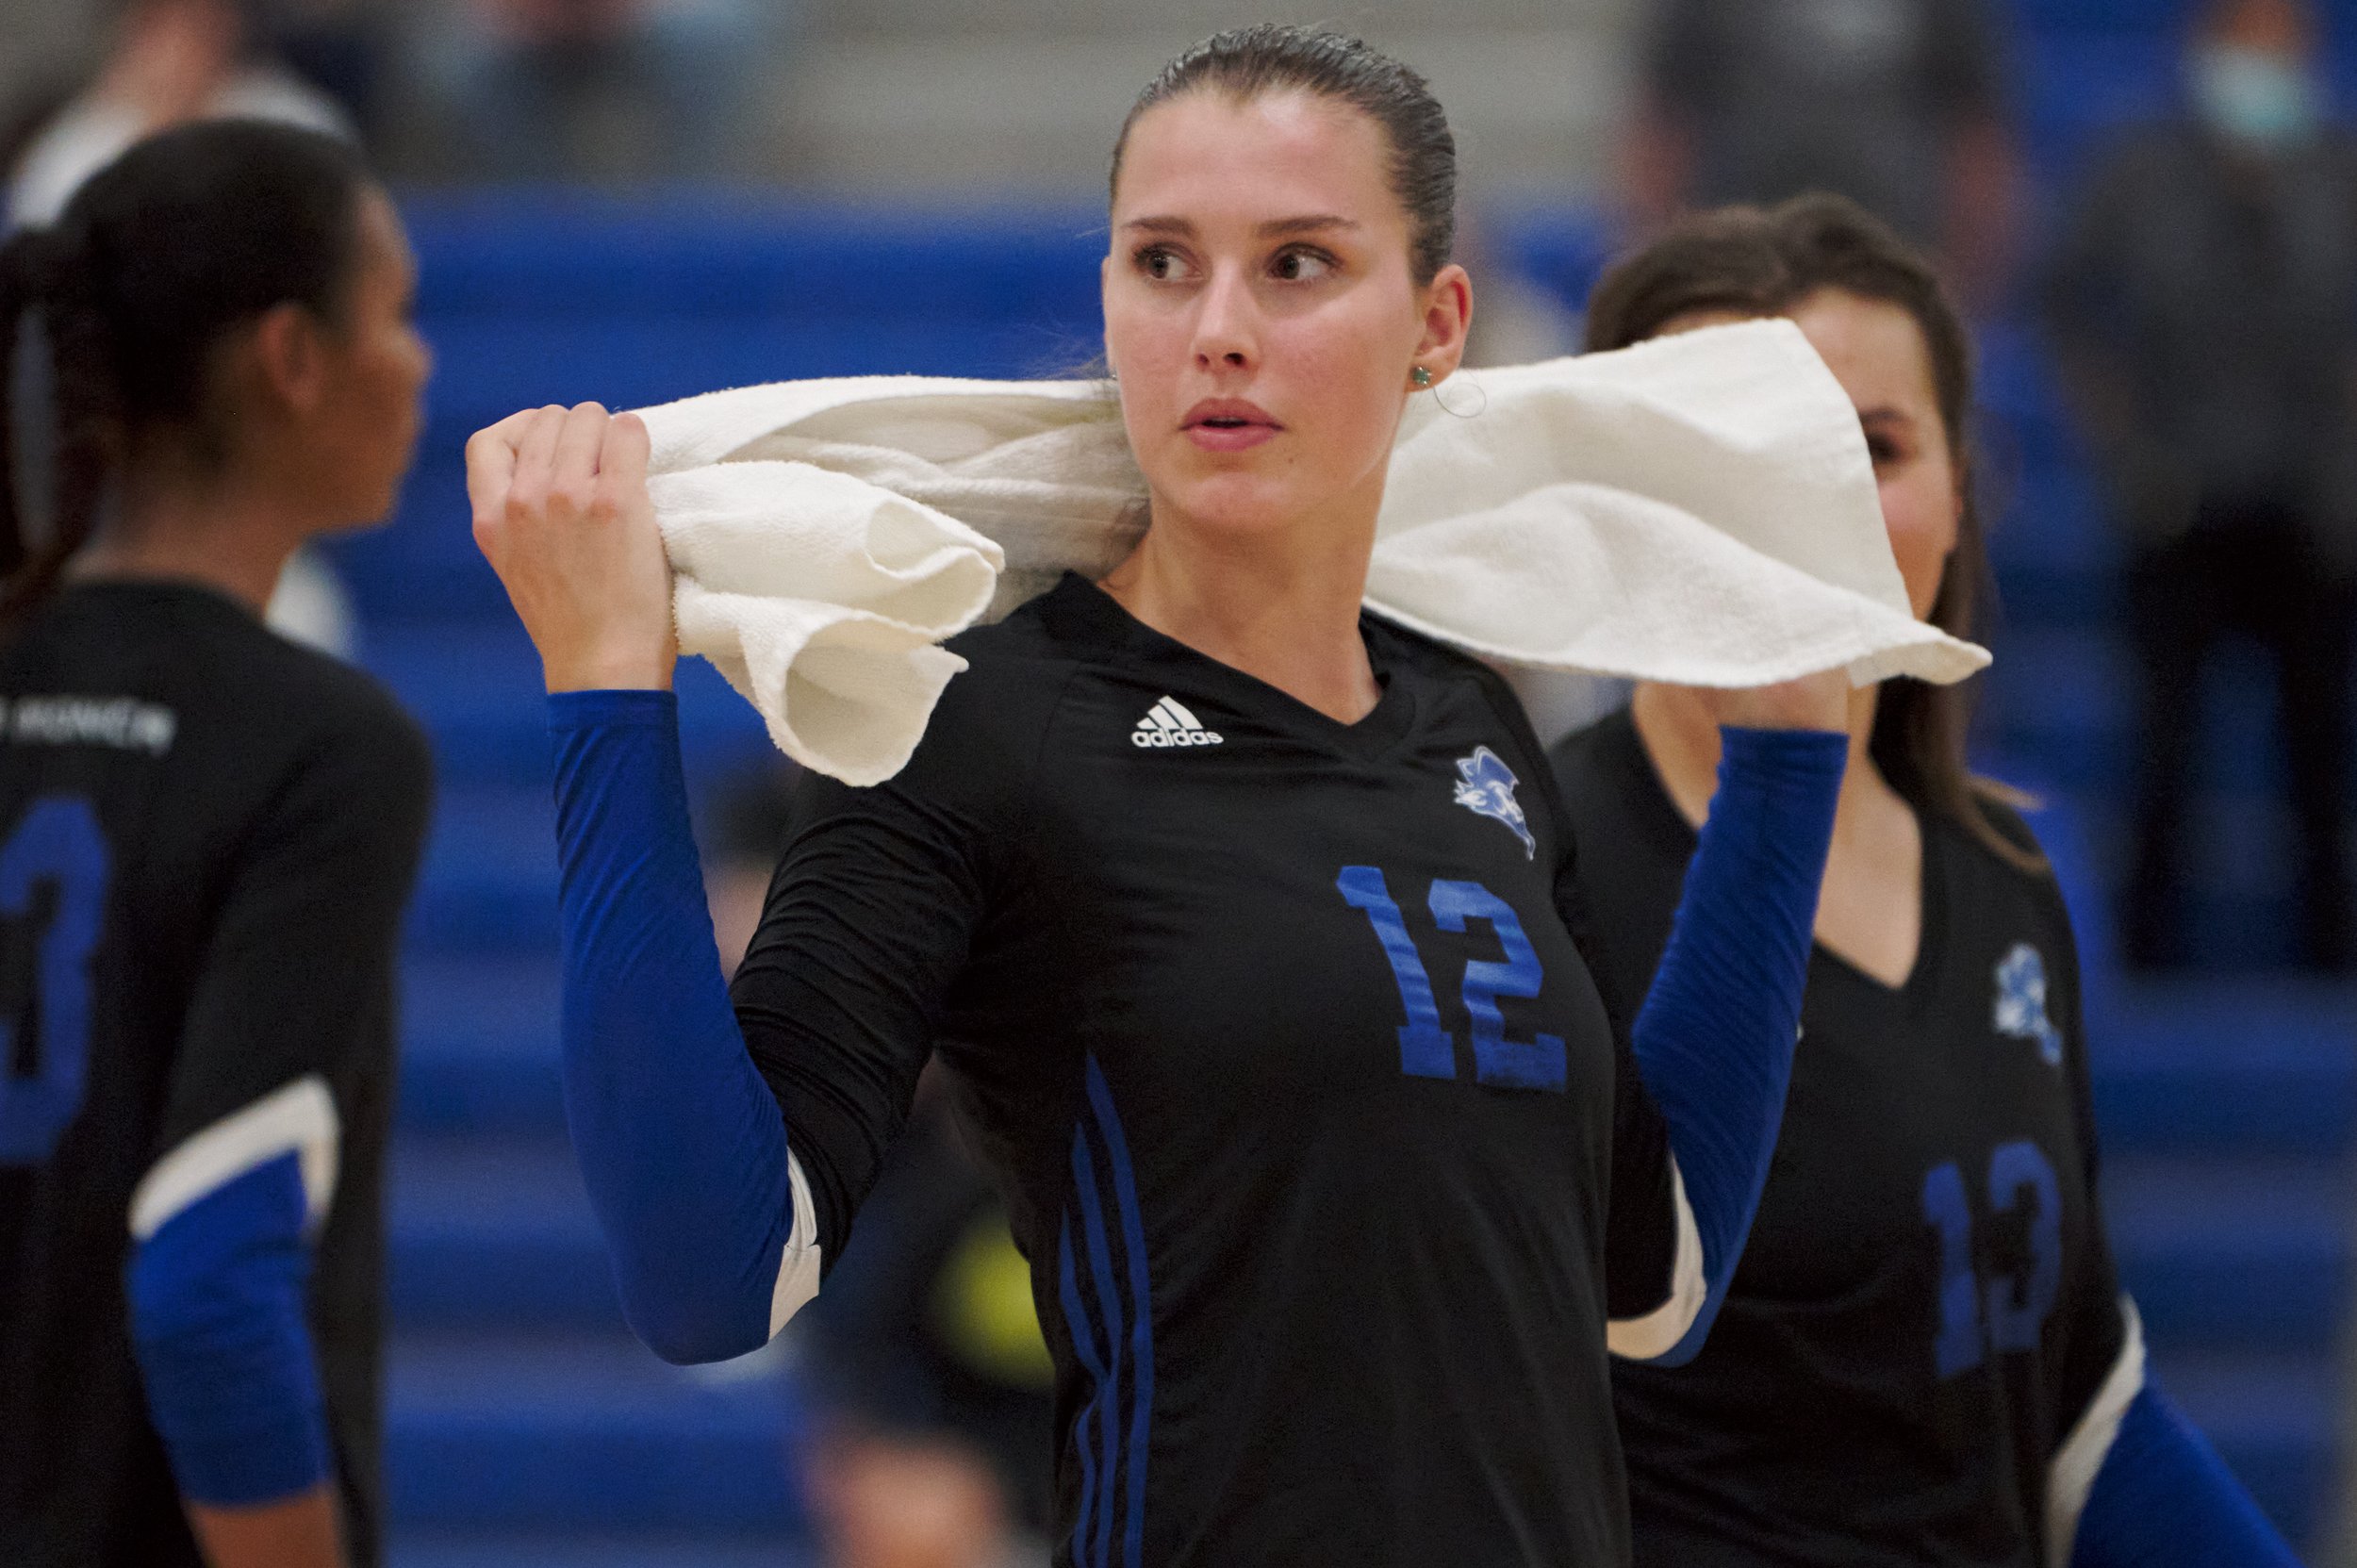  Santa Monica College Corsairs' Mia Paulson during the women's volleyball match against the Bakersfield College Renegades on Wednesday, Sept. 28, 2022, at the Corsair Gym in Santa Monica, Calif. The Corsairs won 3-2. (Nicholas McCall | The Corsair) 